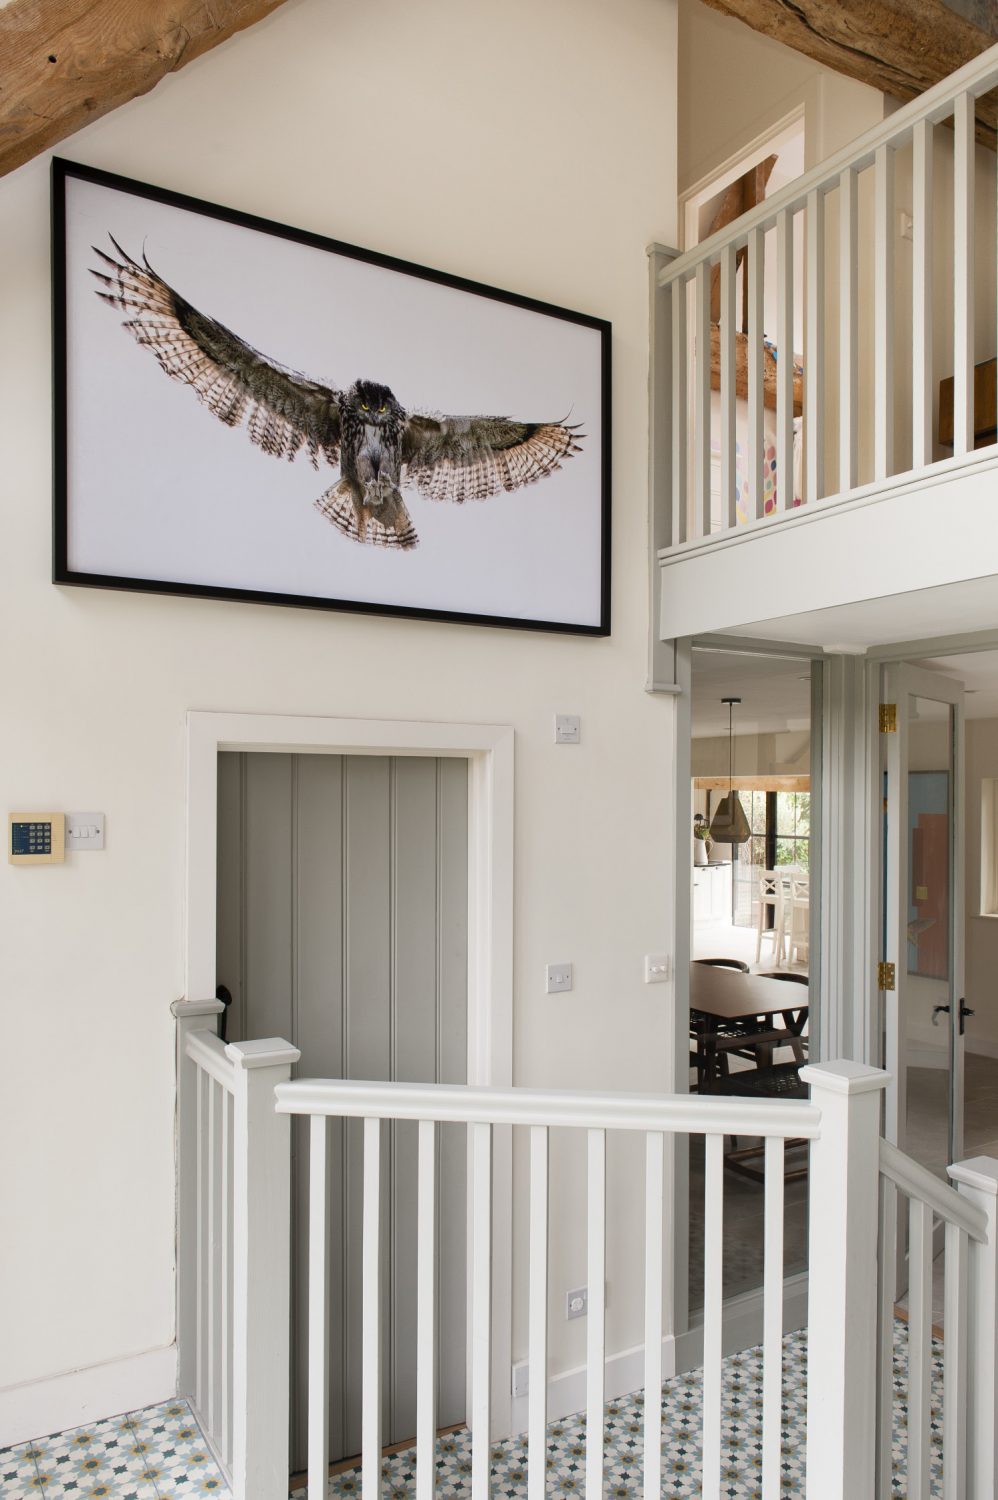 A large spread-winged owl, digital artwork created by Richard, looms over the galleried entrance hall